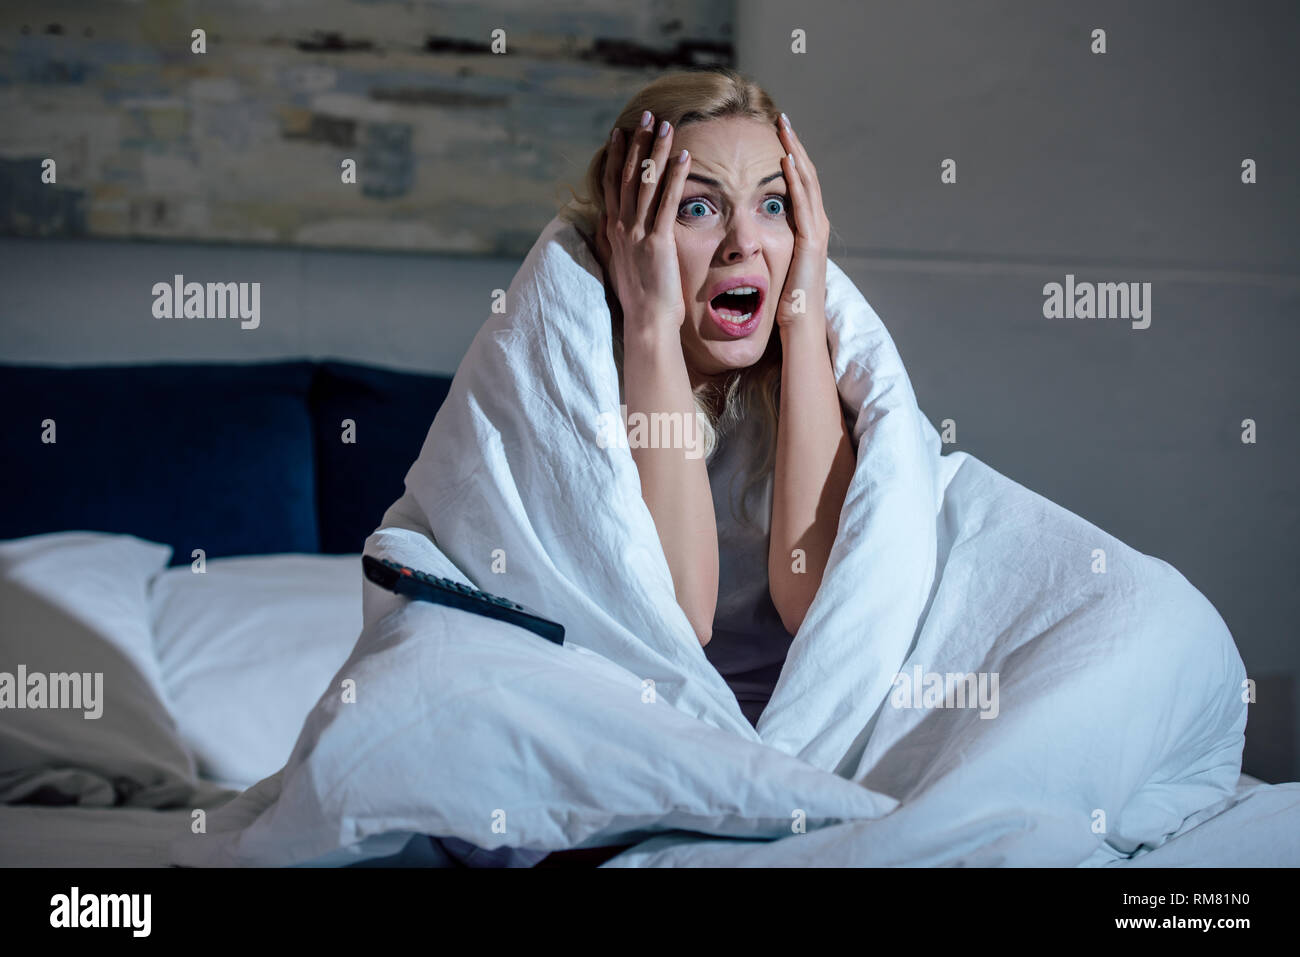 scared woman covered in blanket with hands on head screaming while ...